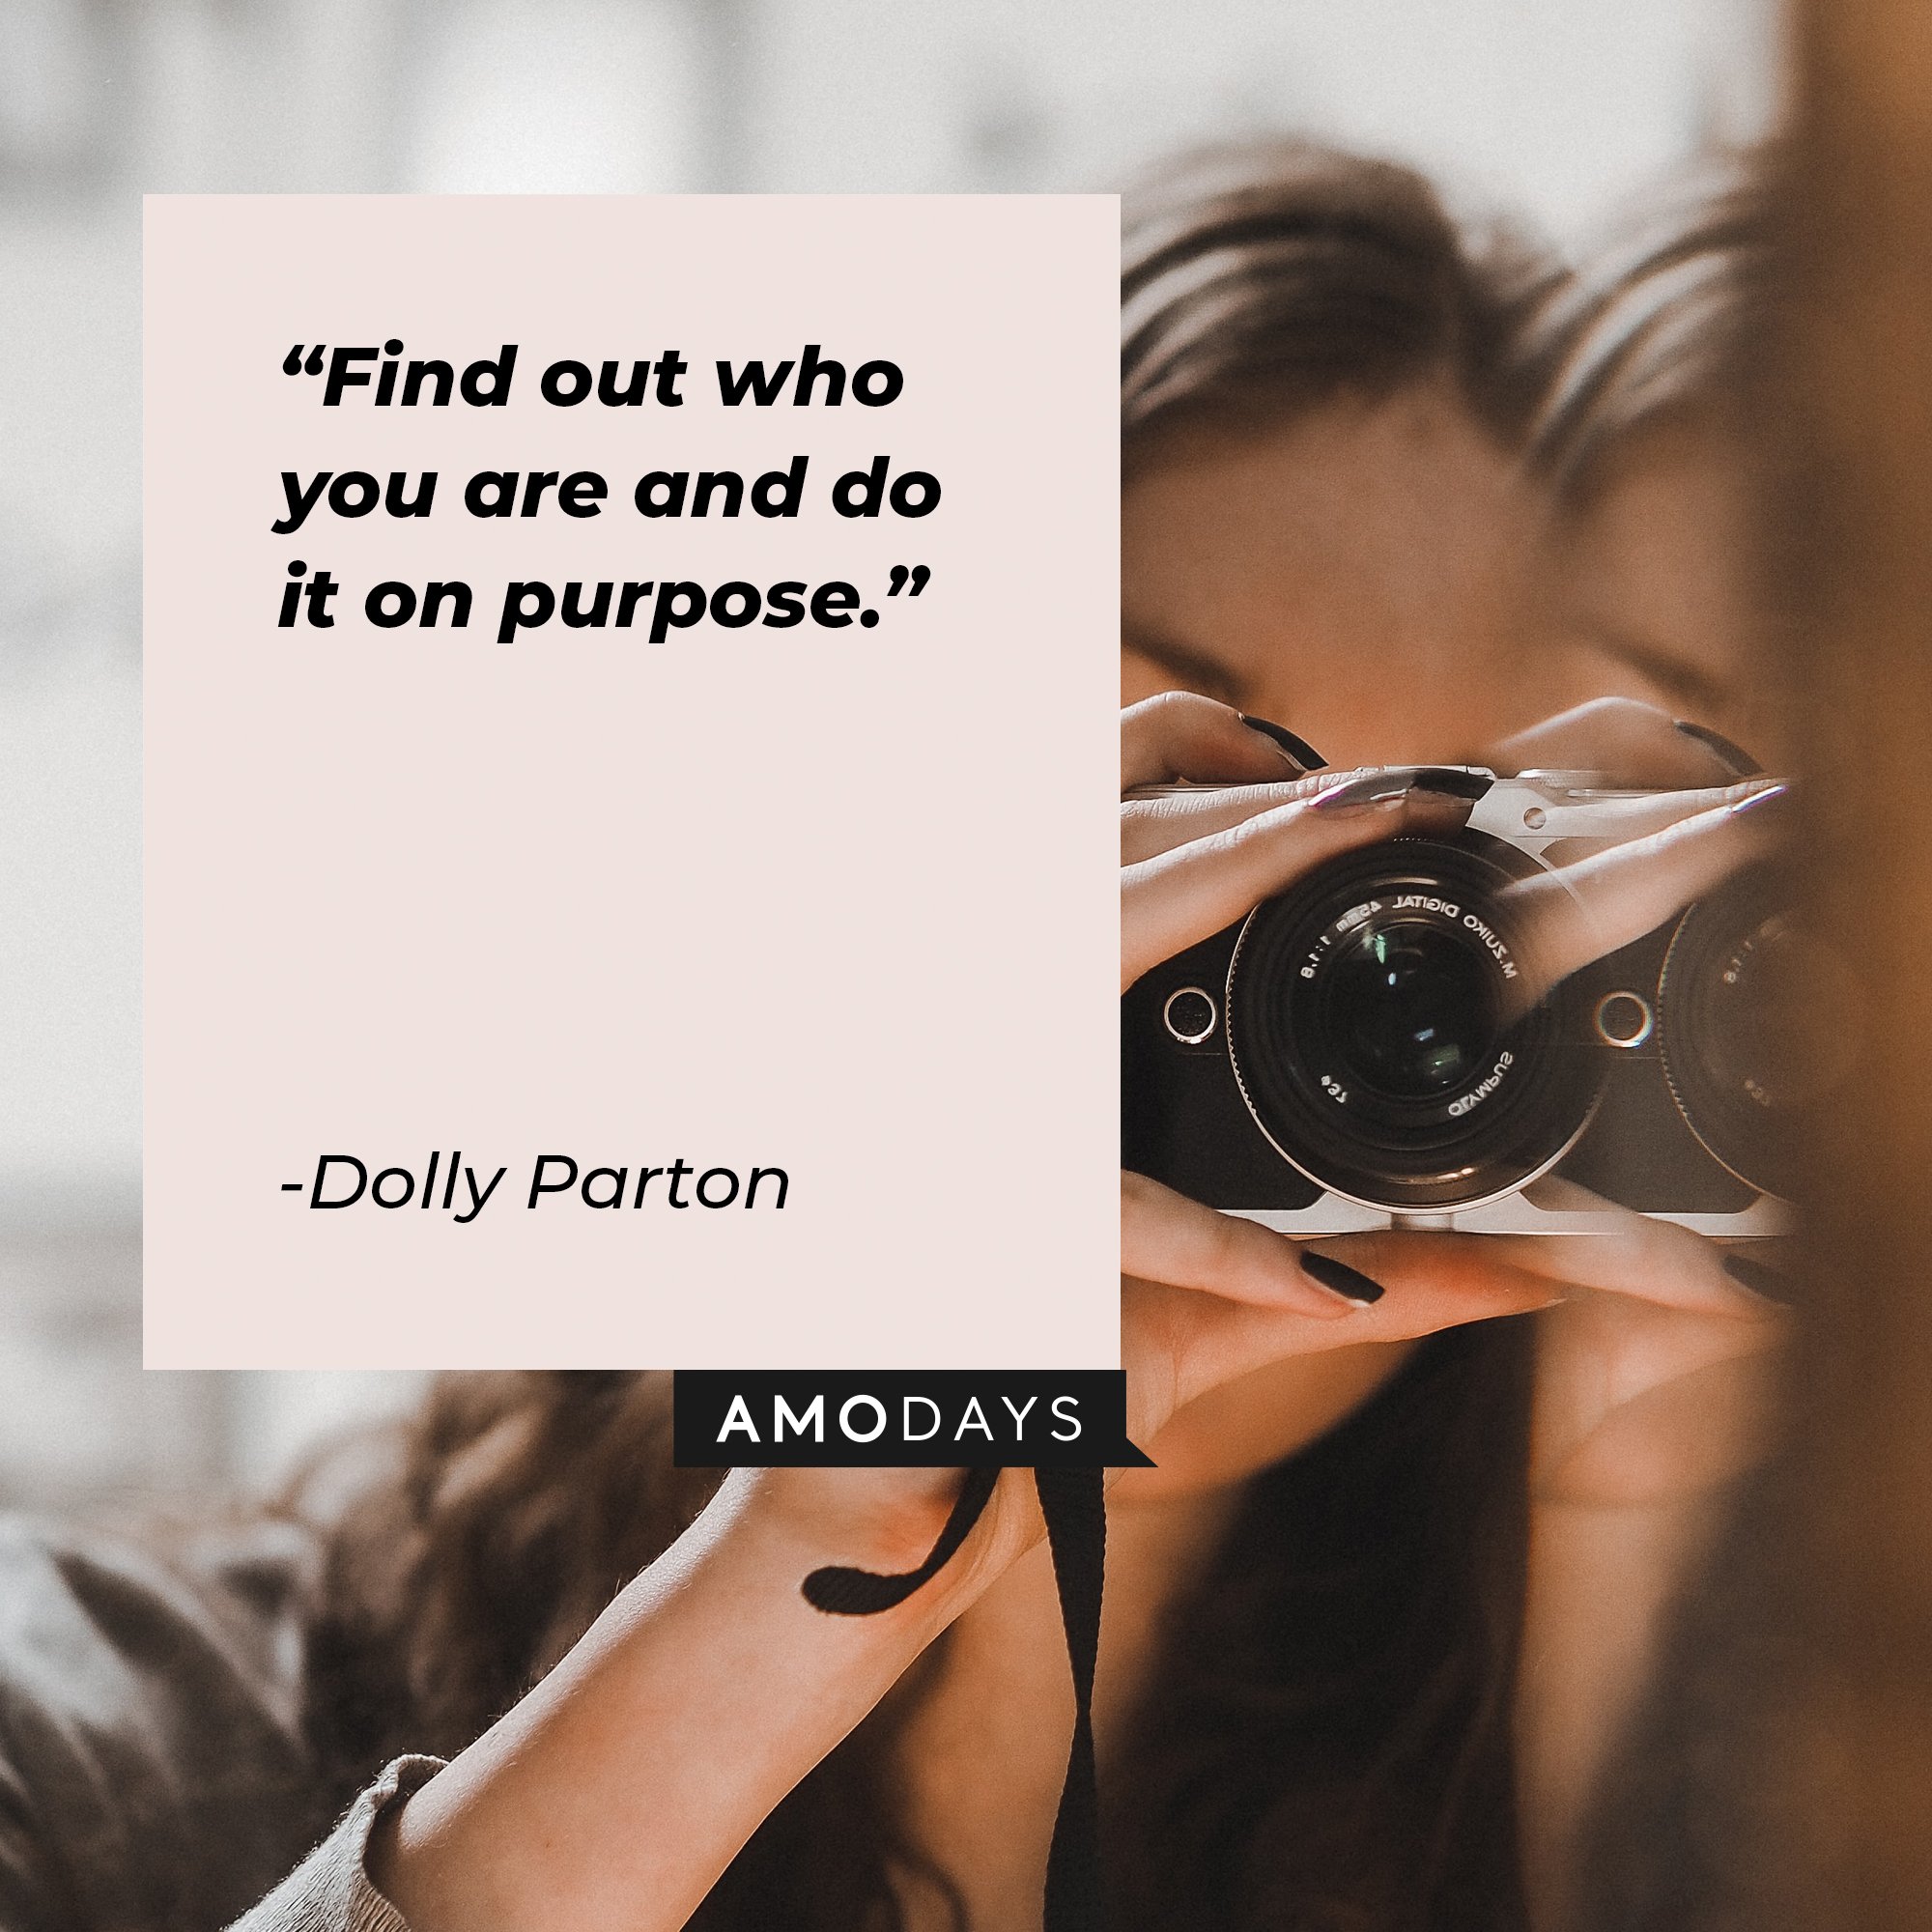 Dolly Parton’s quote: "Find out who you are and do it on purpose." | Image: AmoDays